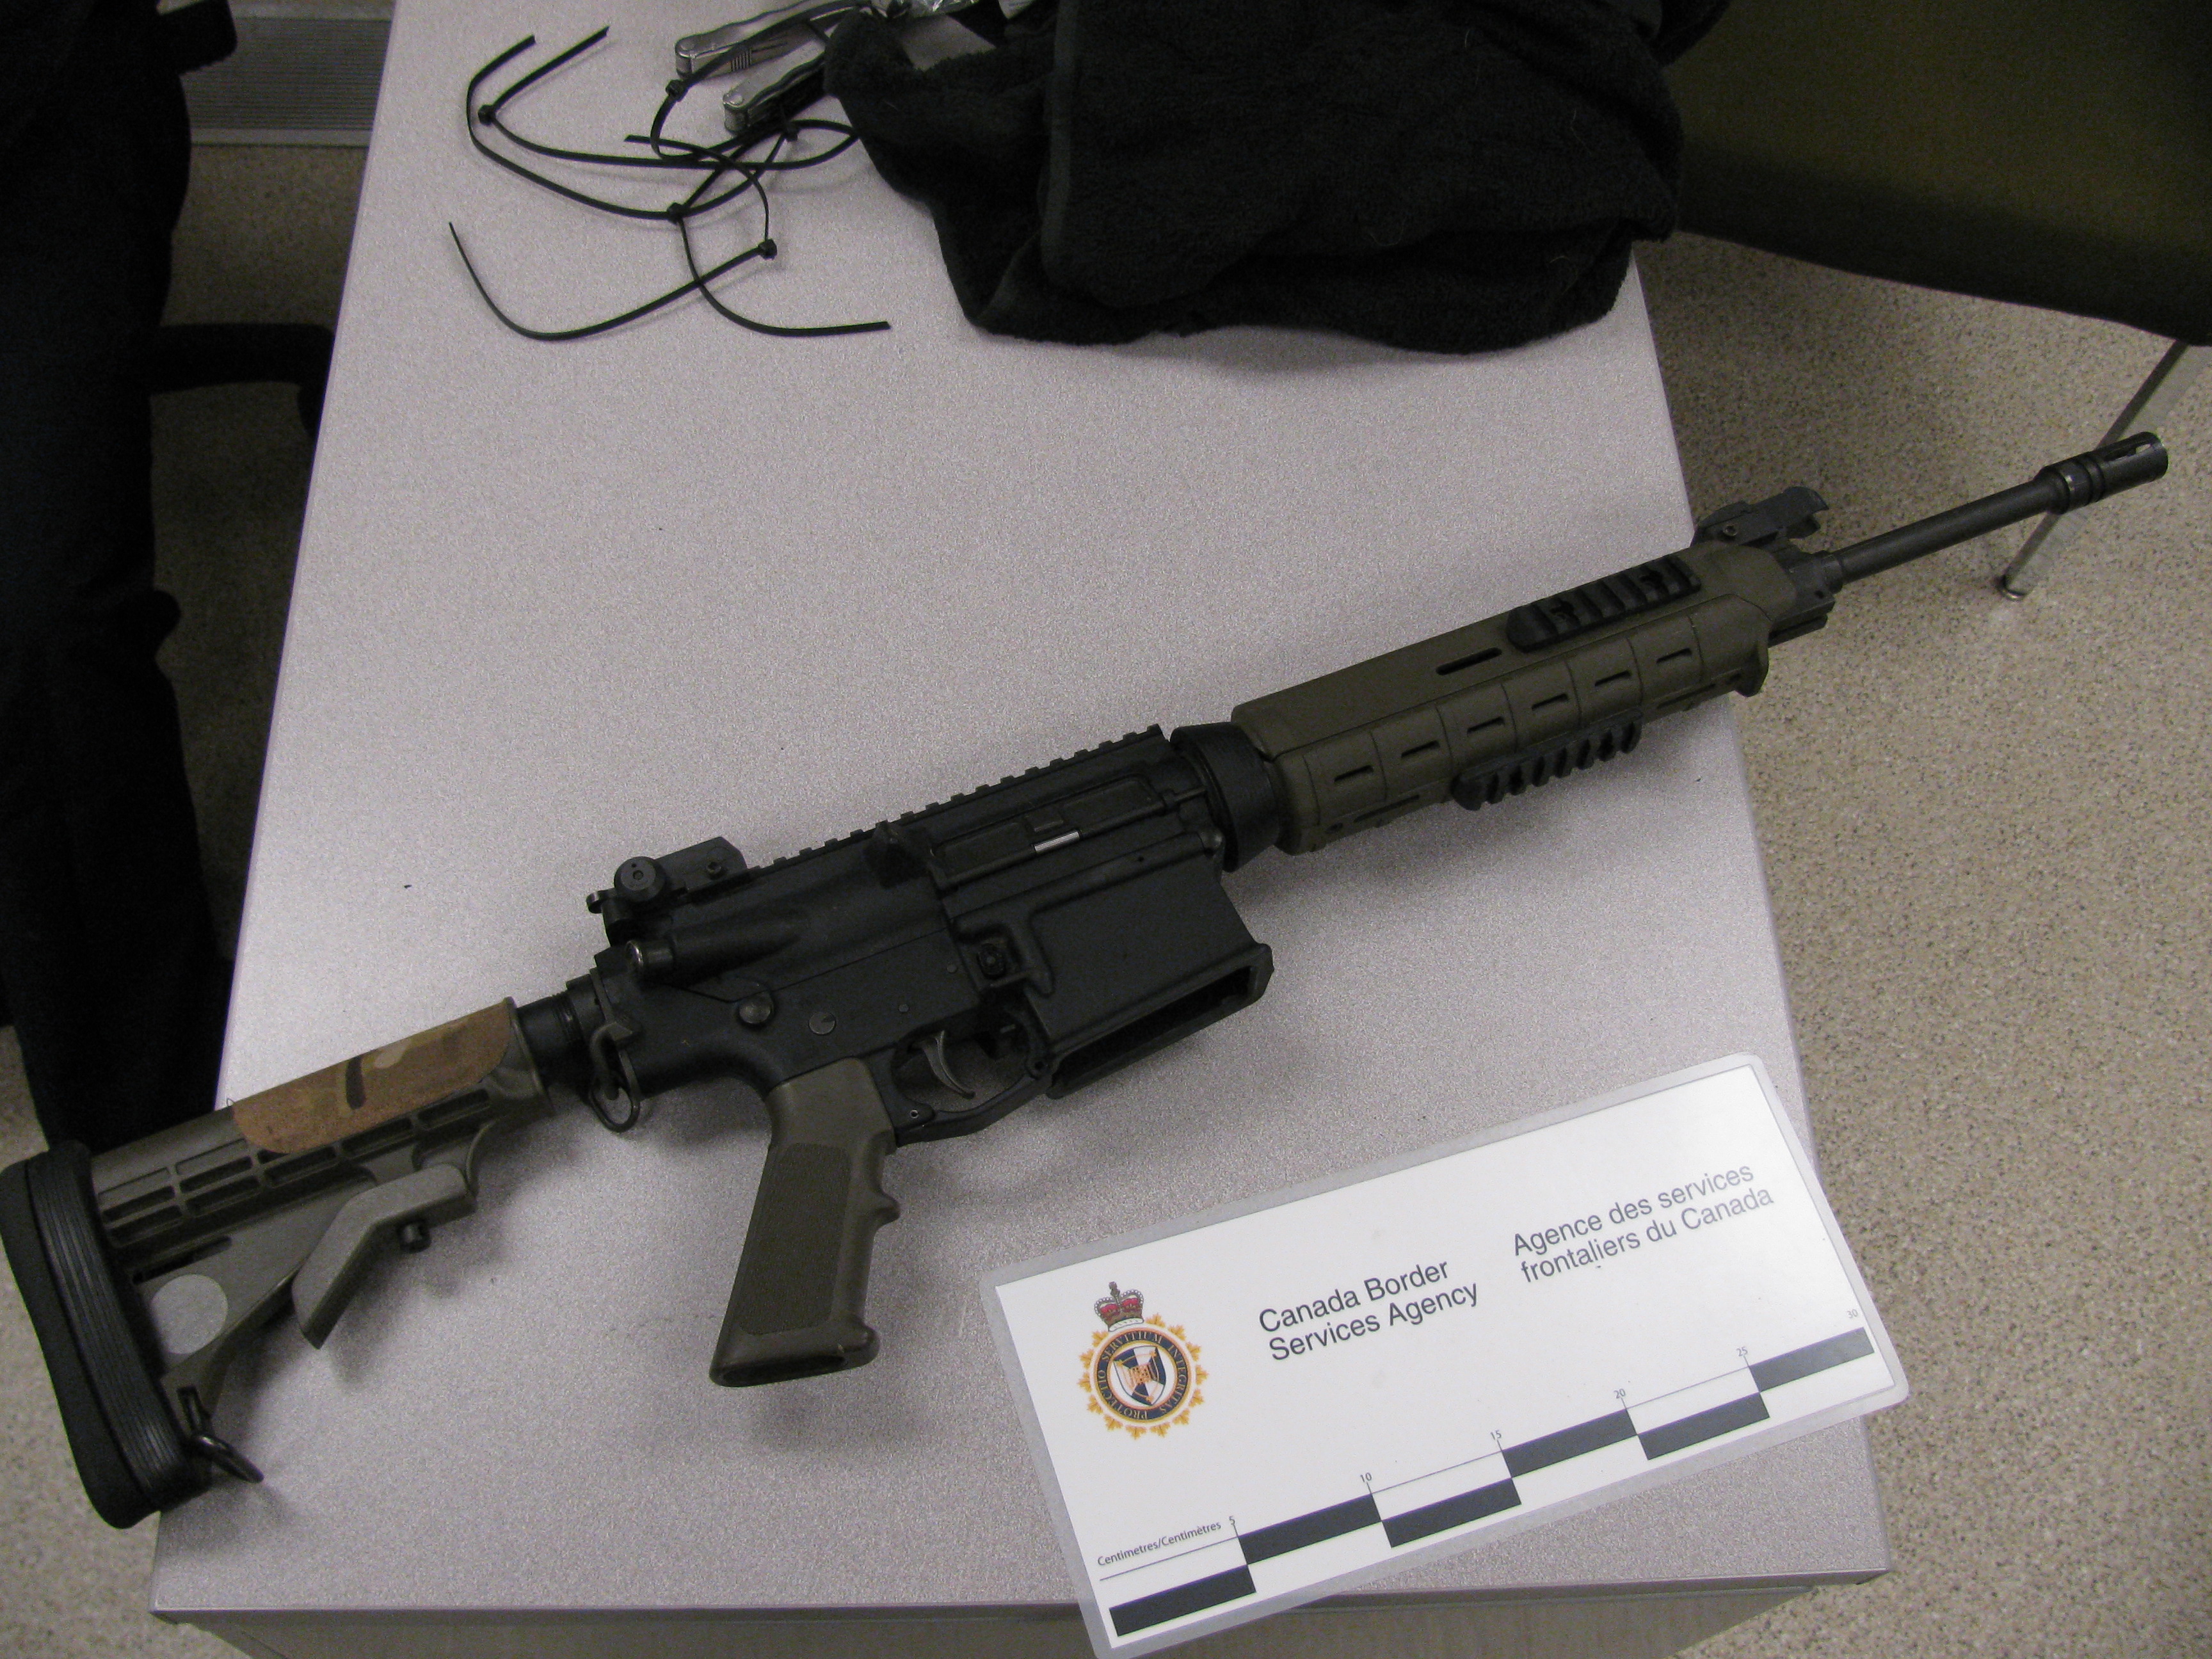 Assault rifle seized at the Beaver Creek Port of Entry in rash of firearms smuggling cases